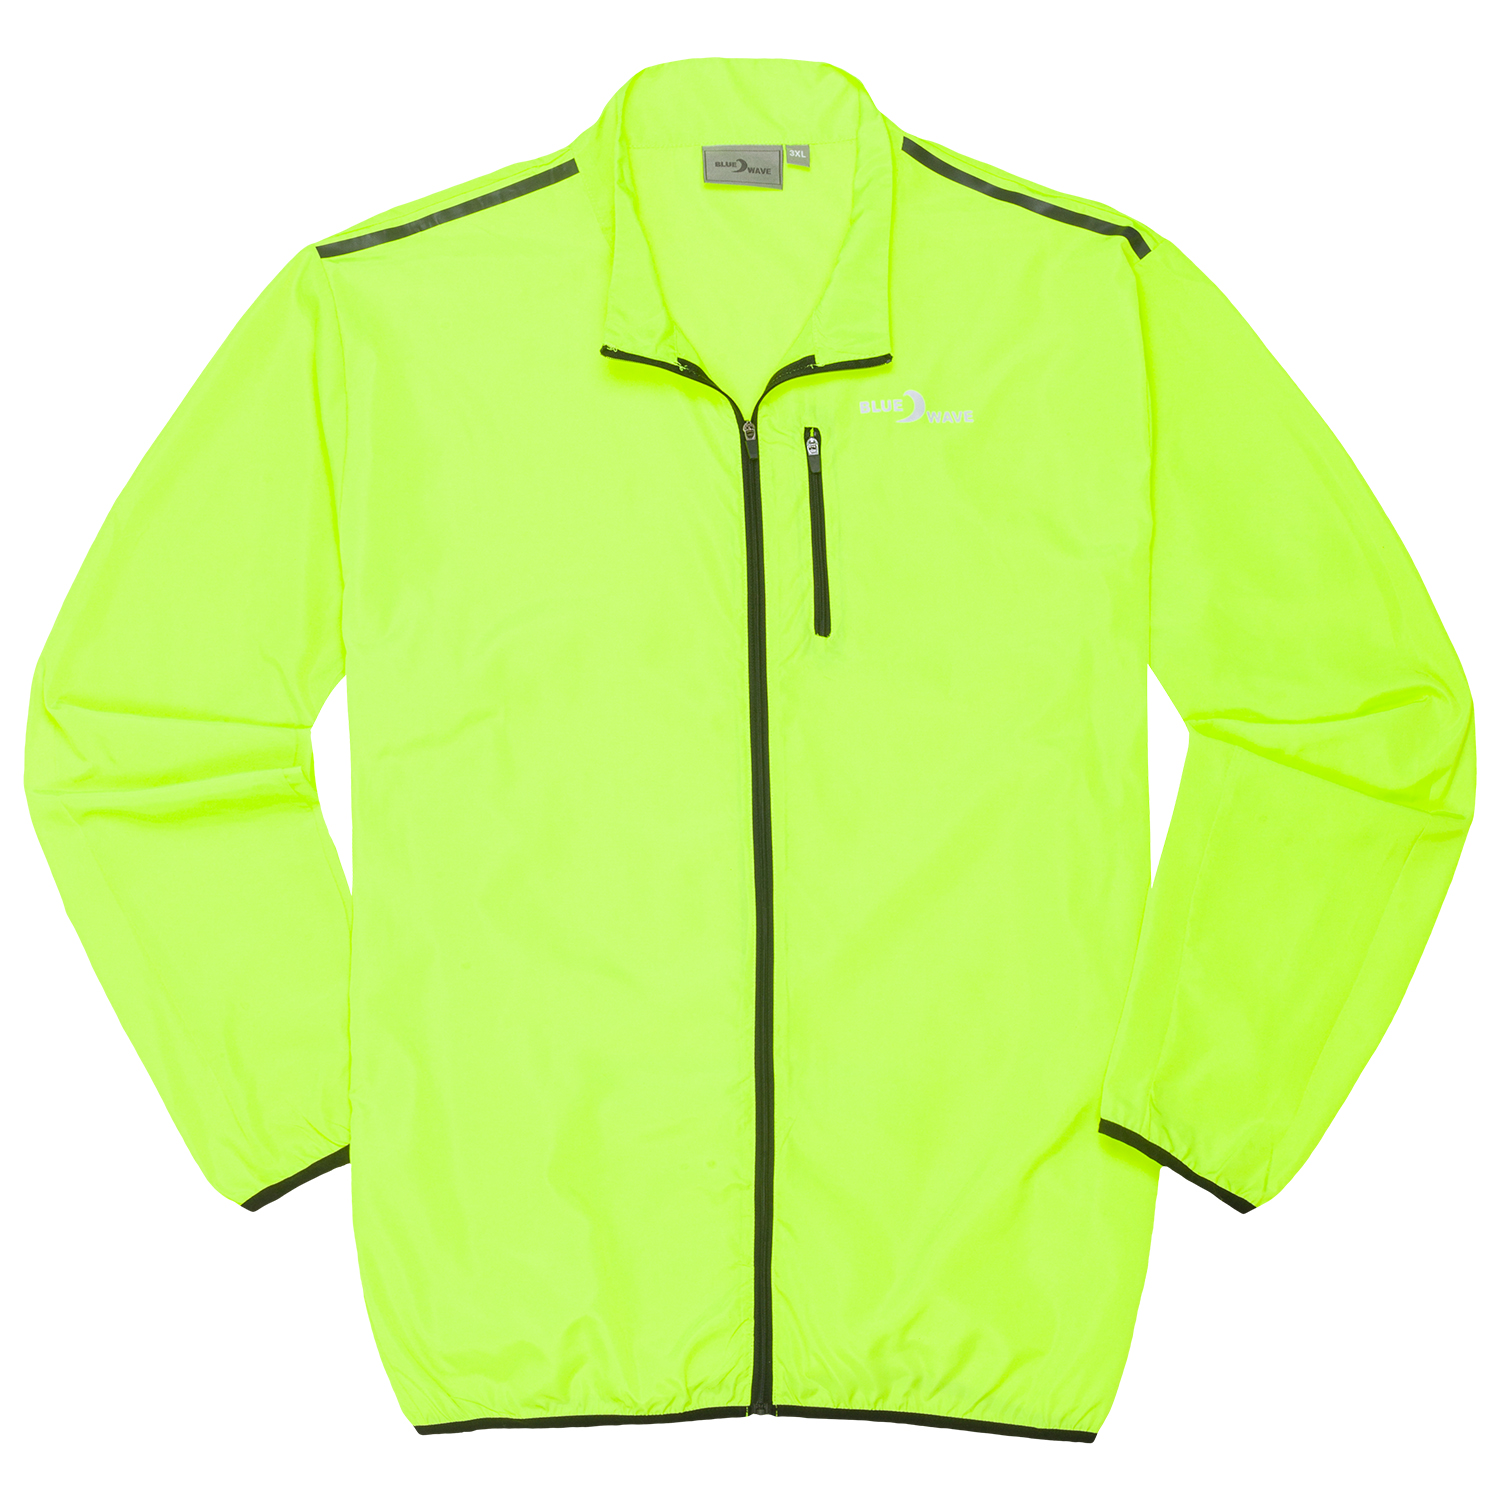 Bike jacket in neon yellow series Anton by Blue Wave for men up to oversize 10XL